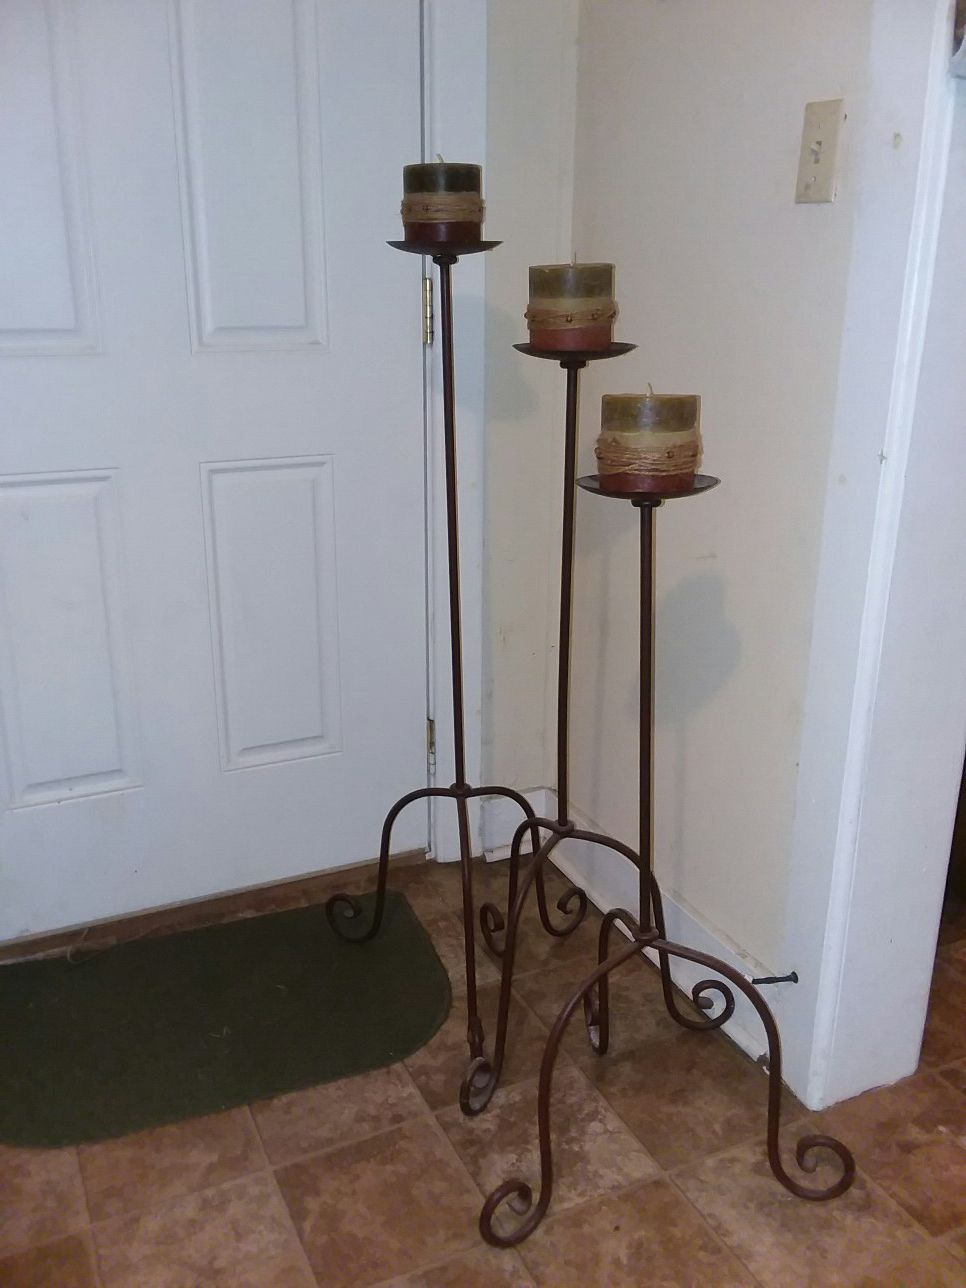 3 black and brown floor lamps with candles